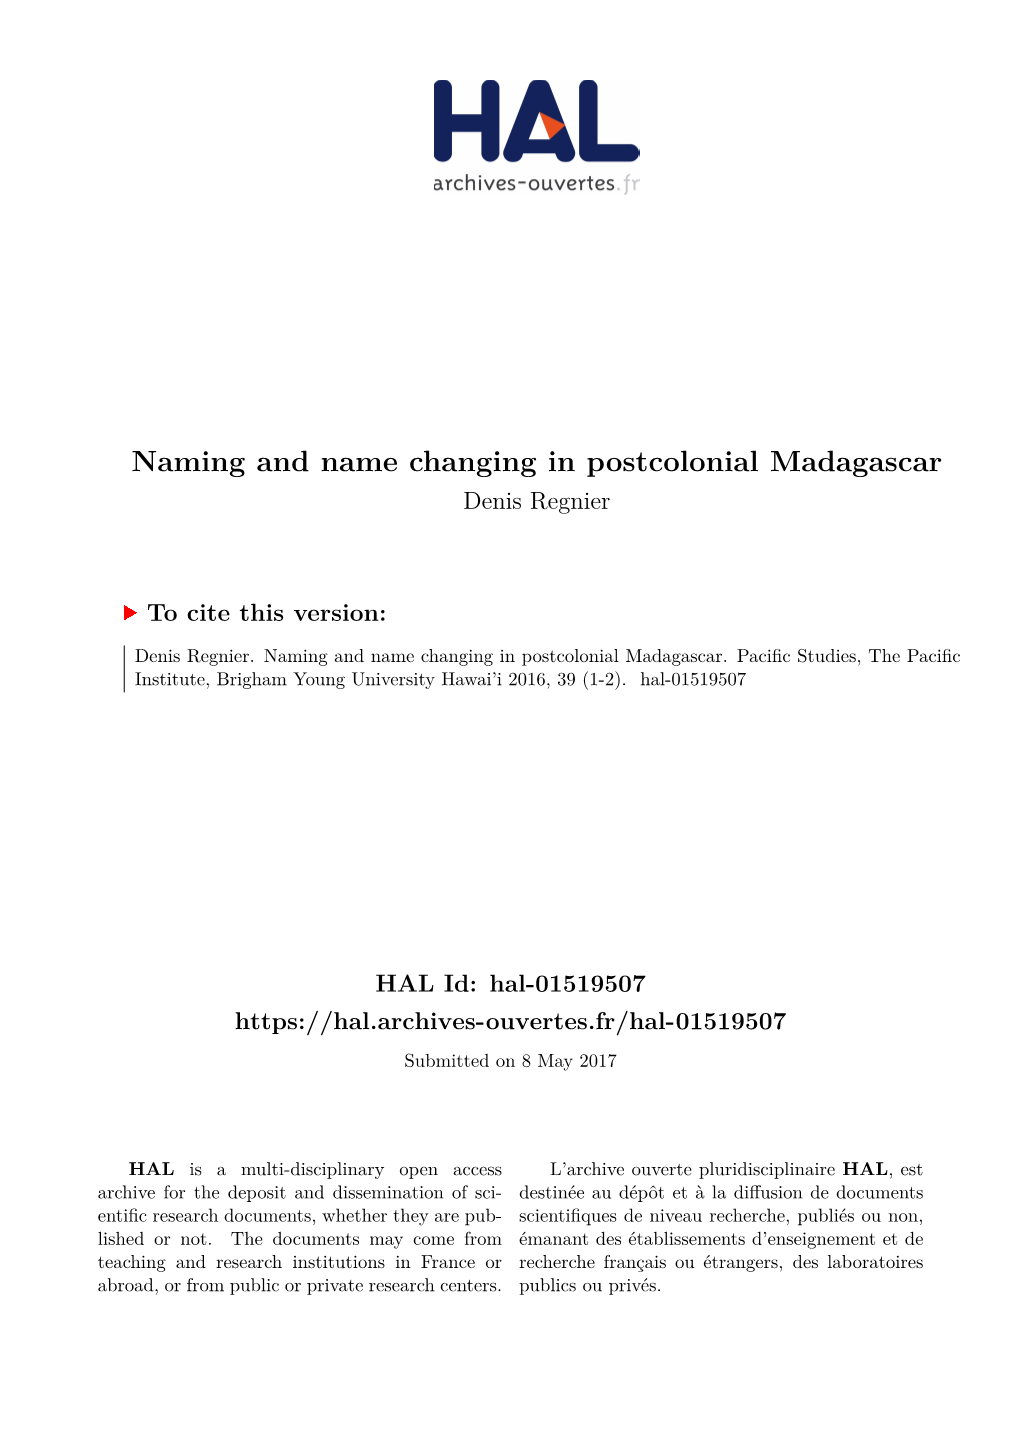 Naming and Name Changing in Postcolonial Madagascar Denis Regnier